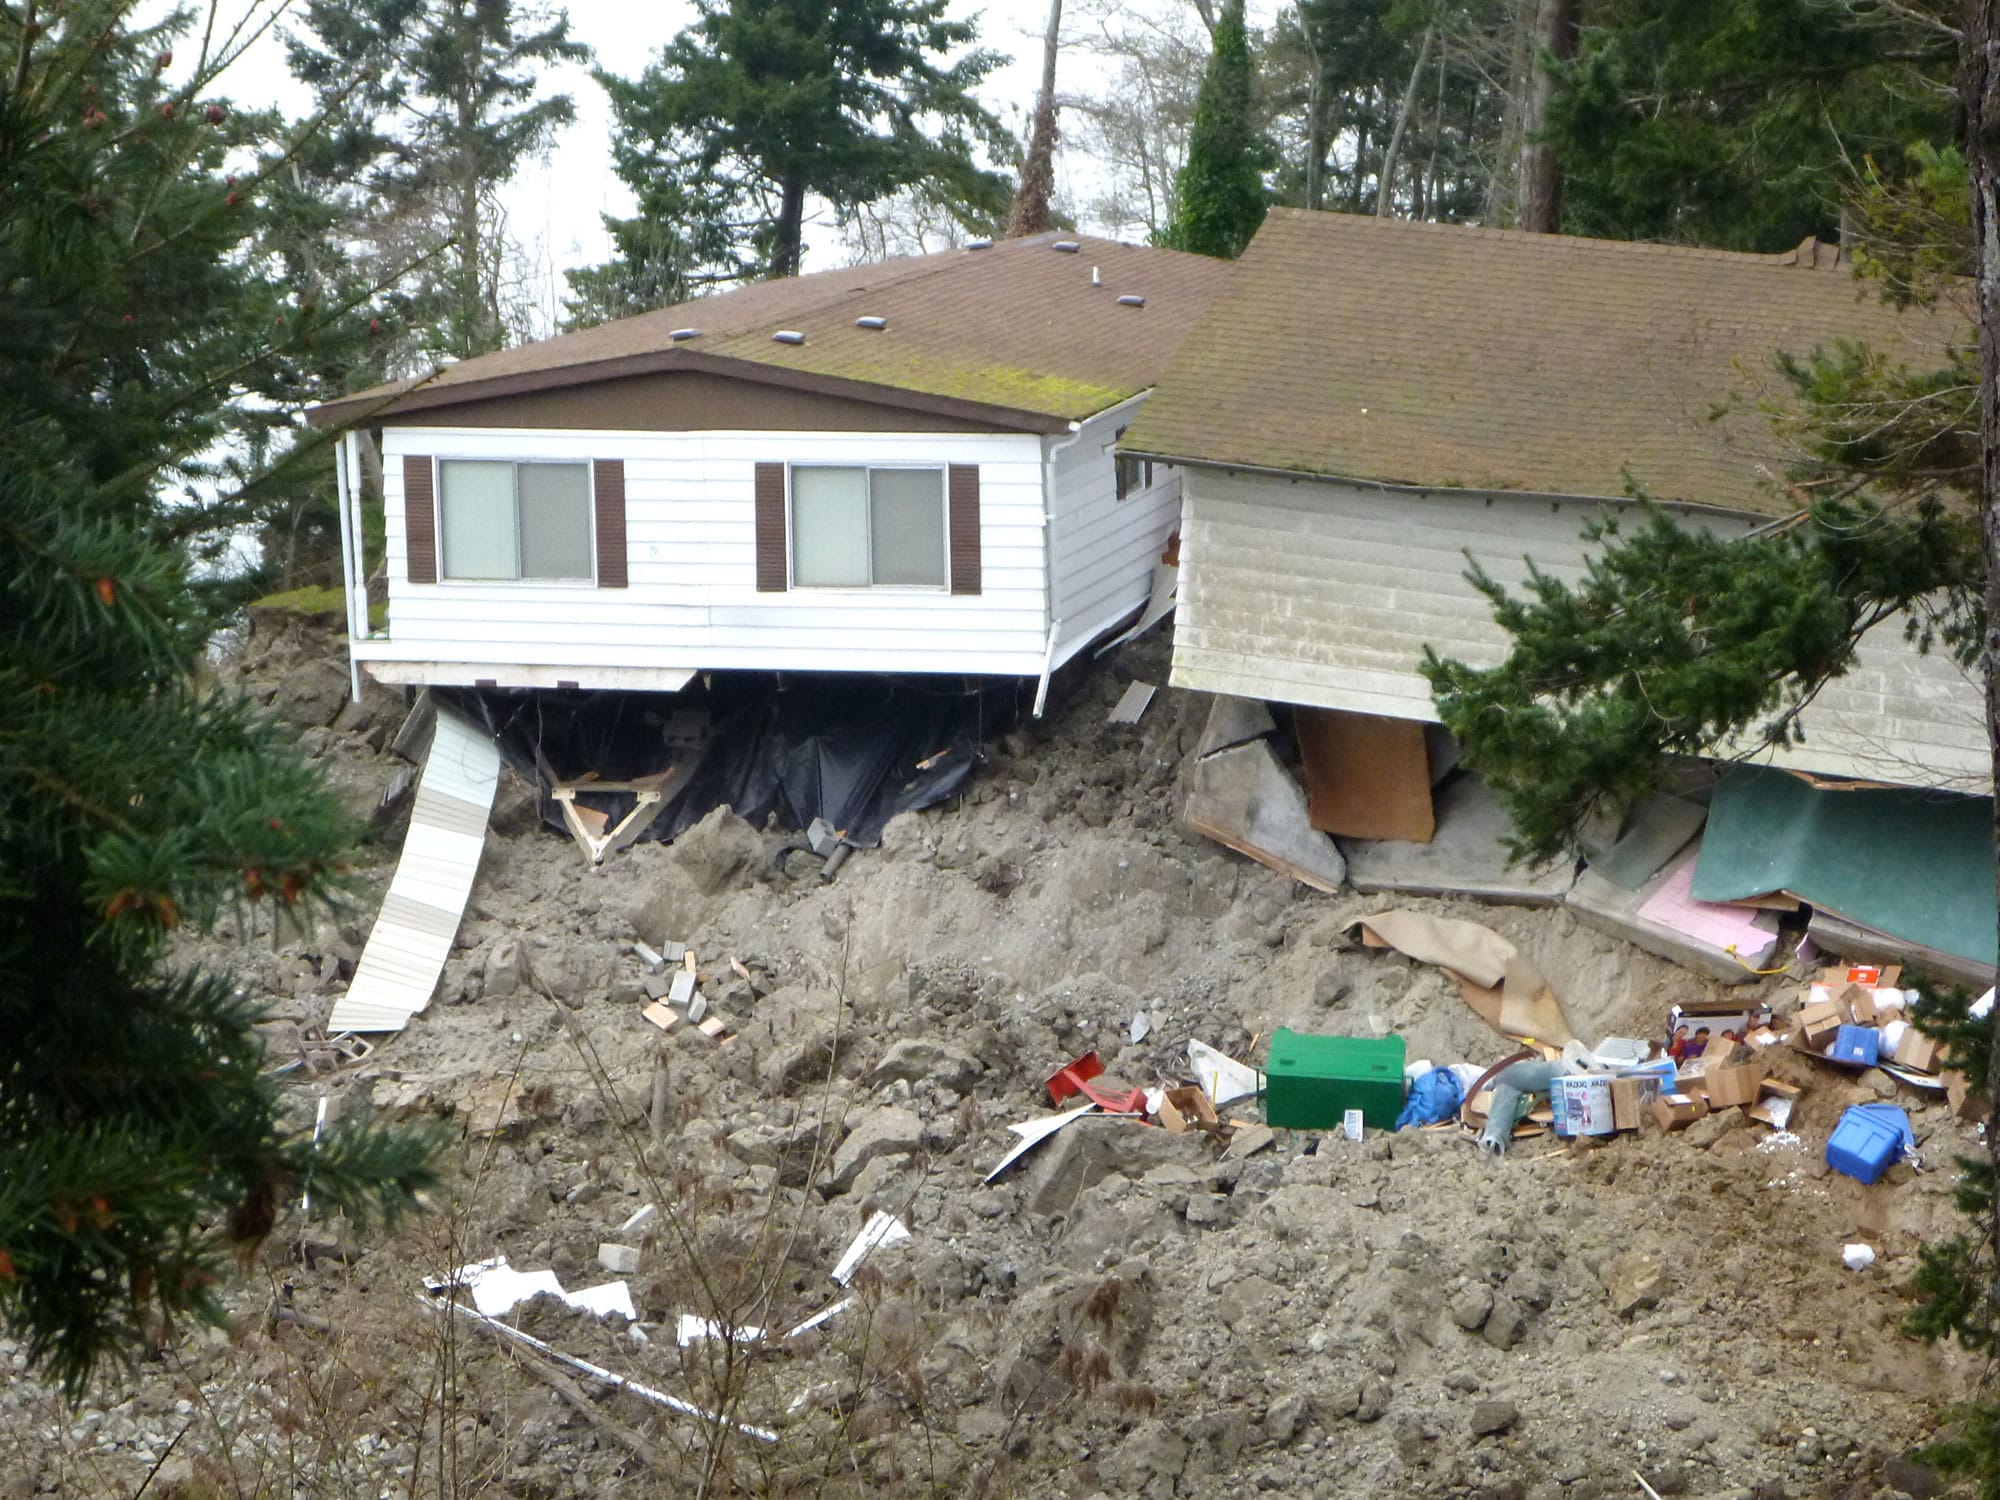 This home was damaged by the massive landslide that also isolated or threatened more than 30 others near Coupeville.